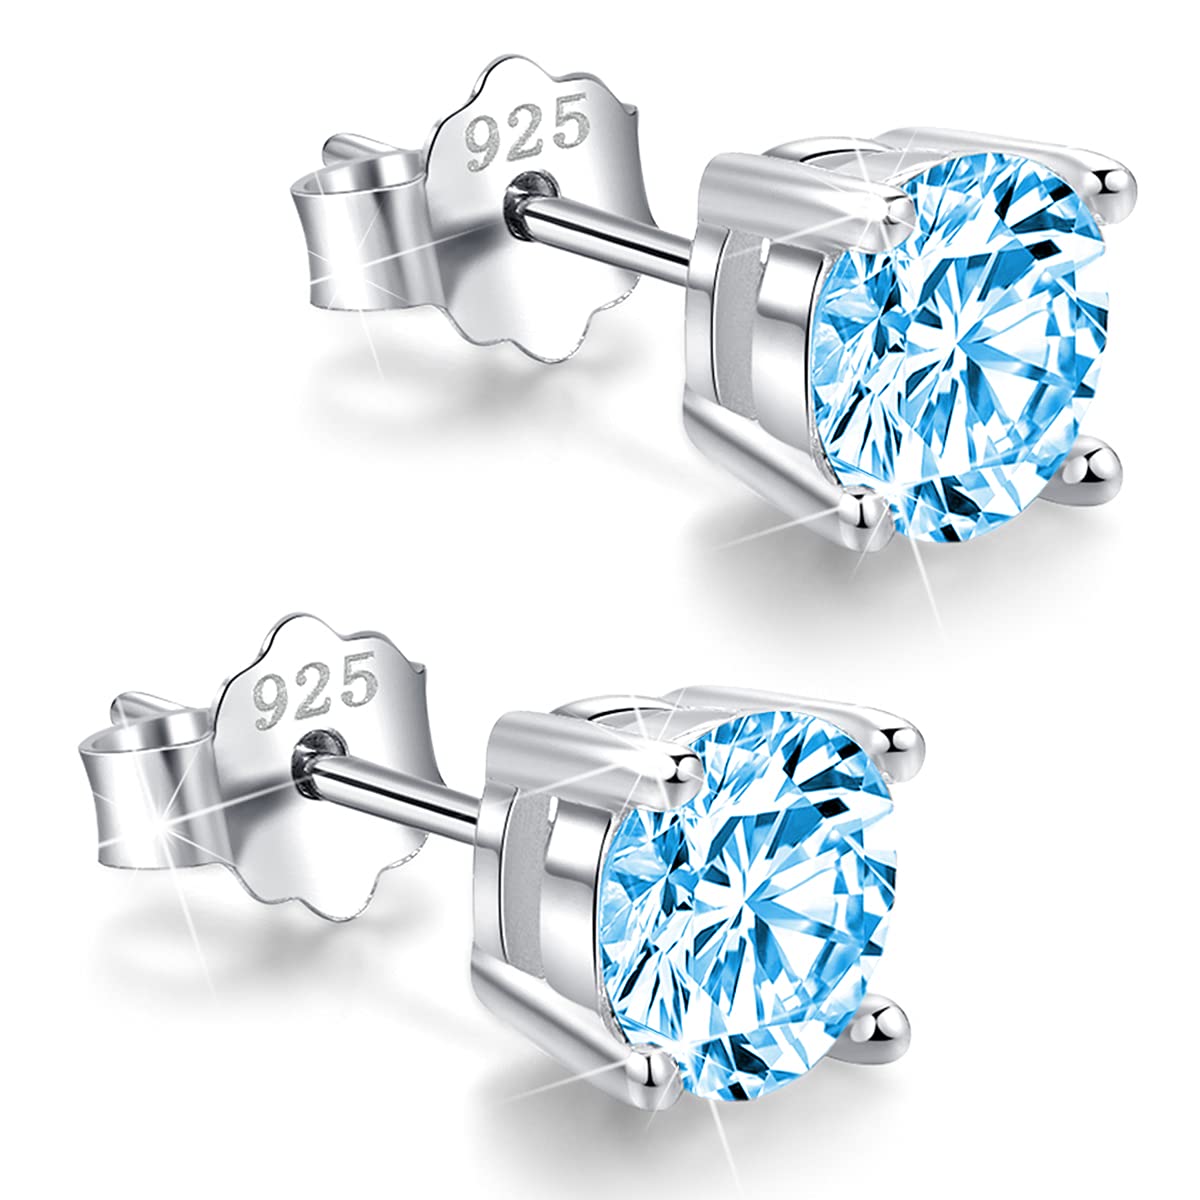 925 Sterling Silver Round-Cut Blue Cubic Zirconia Stud Earrings 3mm-8mm Options, Simulated Diamond CZ Studs Hypoallergenic Jewelry (4mm)